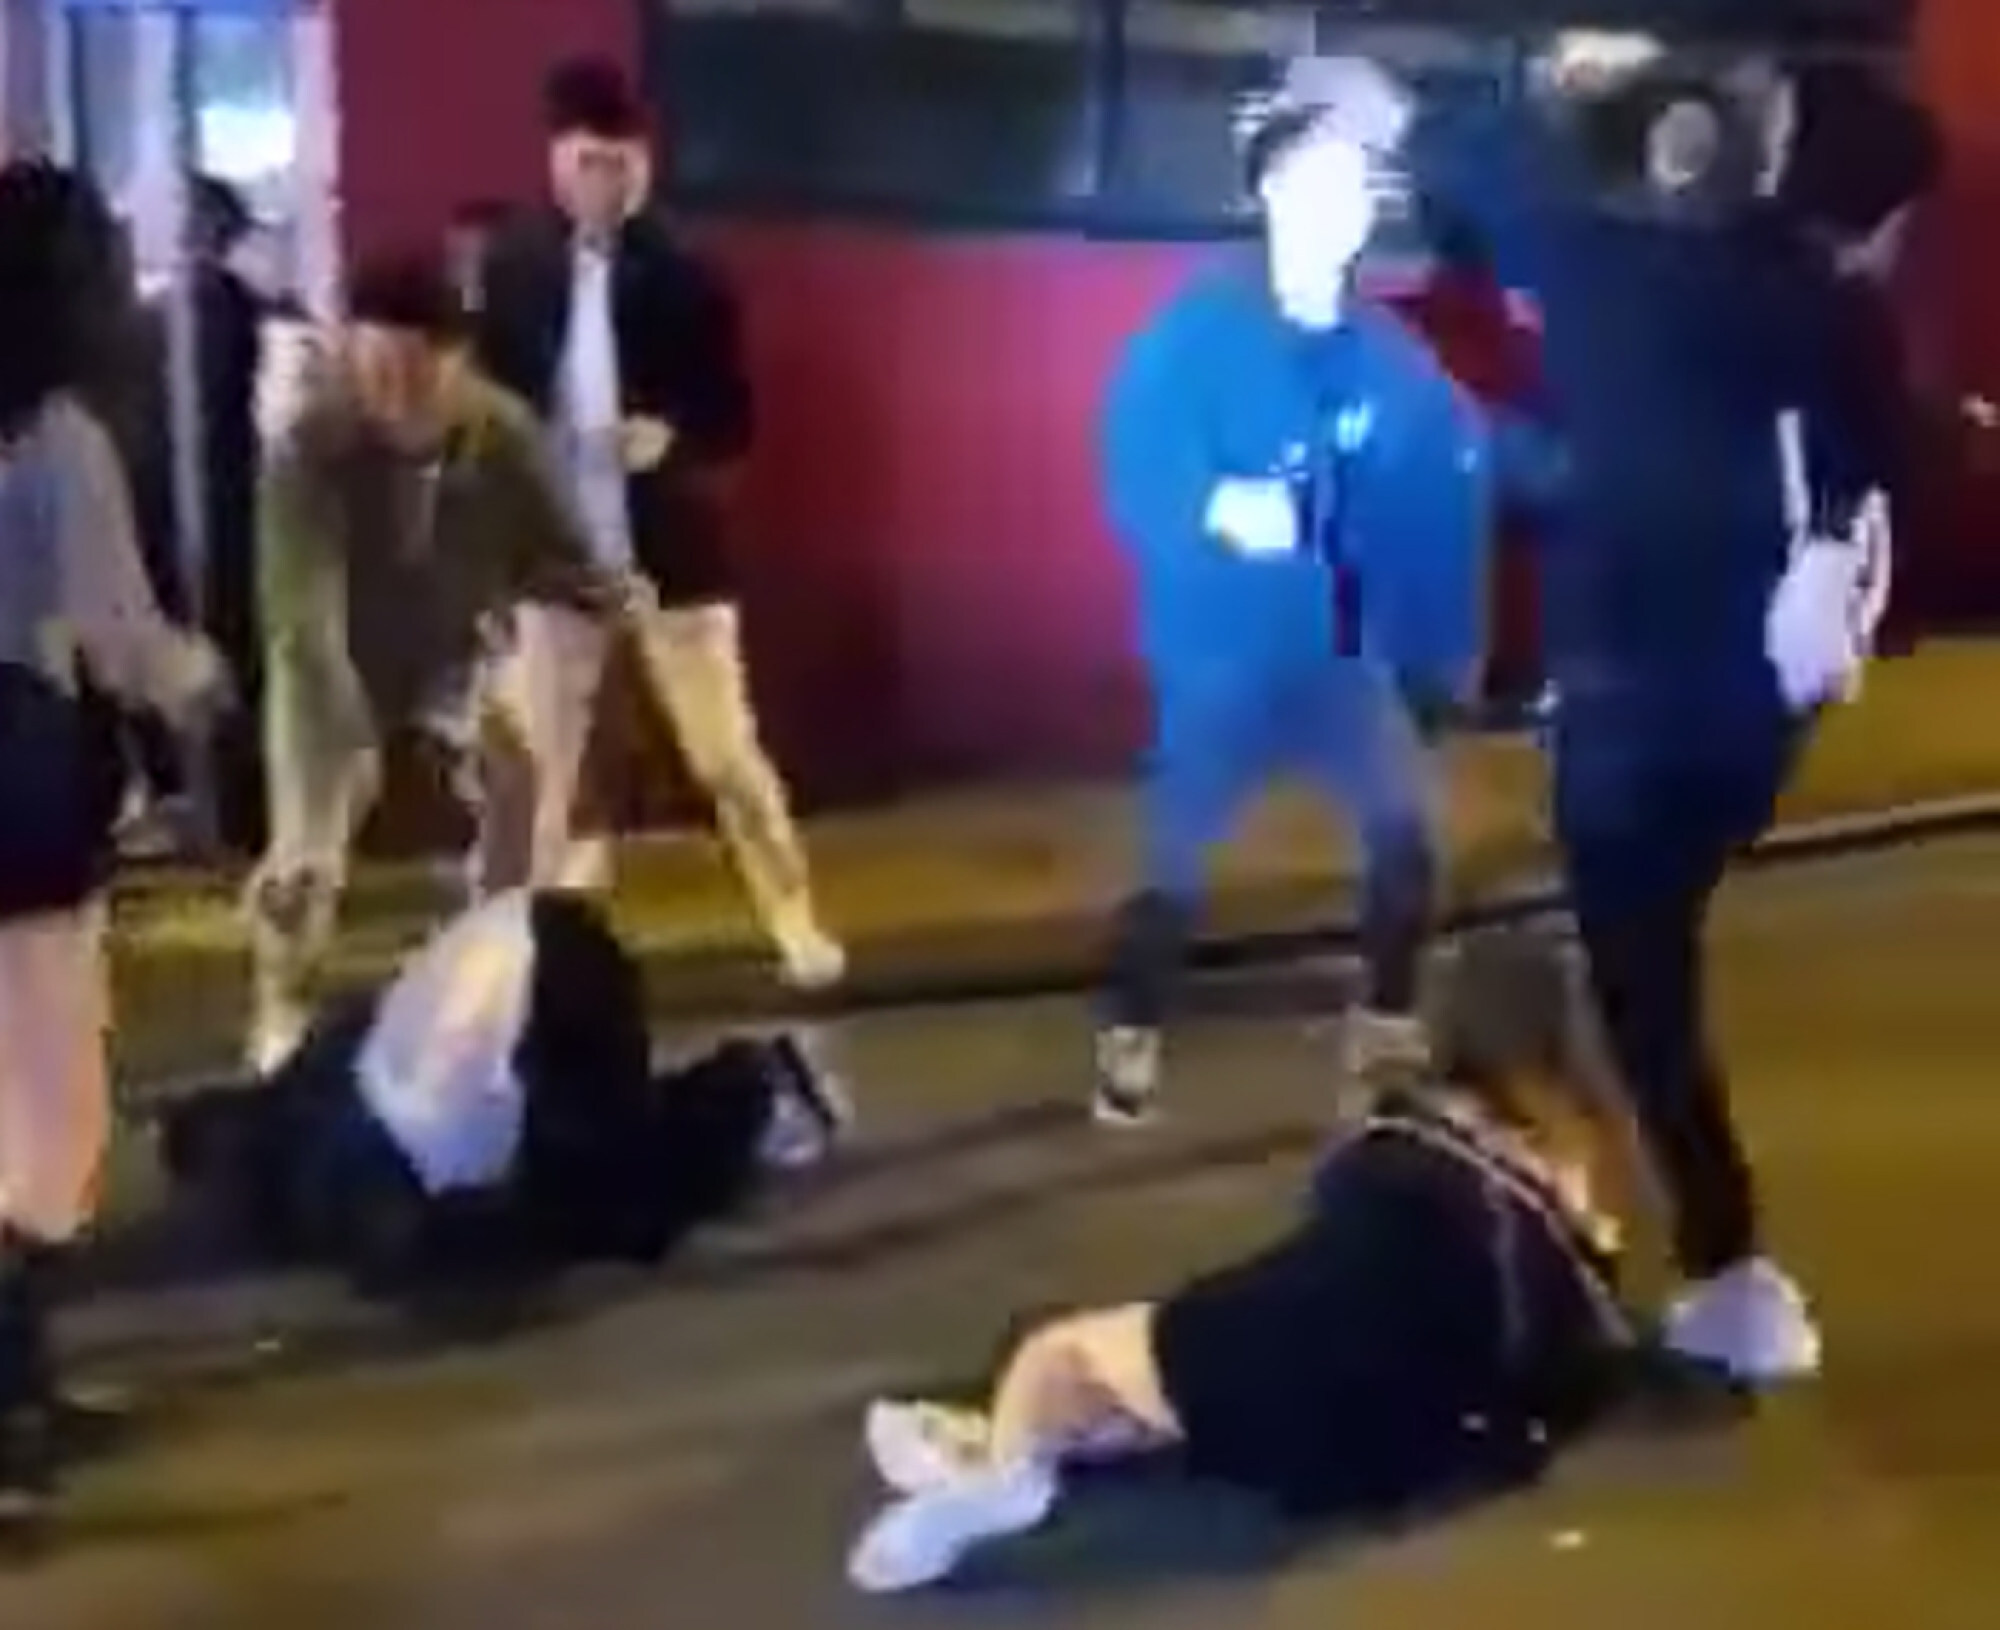 The fight erupted in the early hours of Sunday. Photo: Facebook